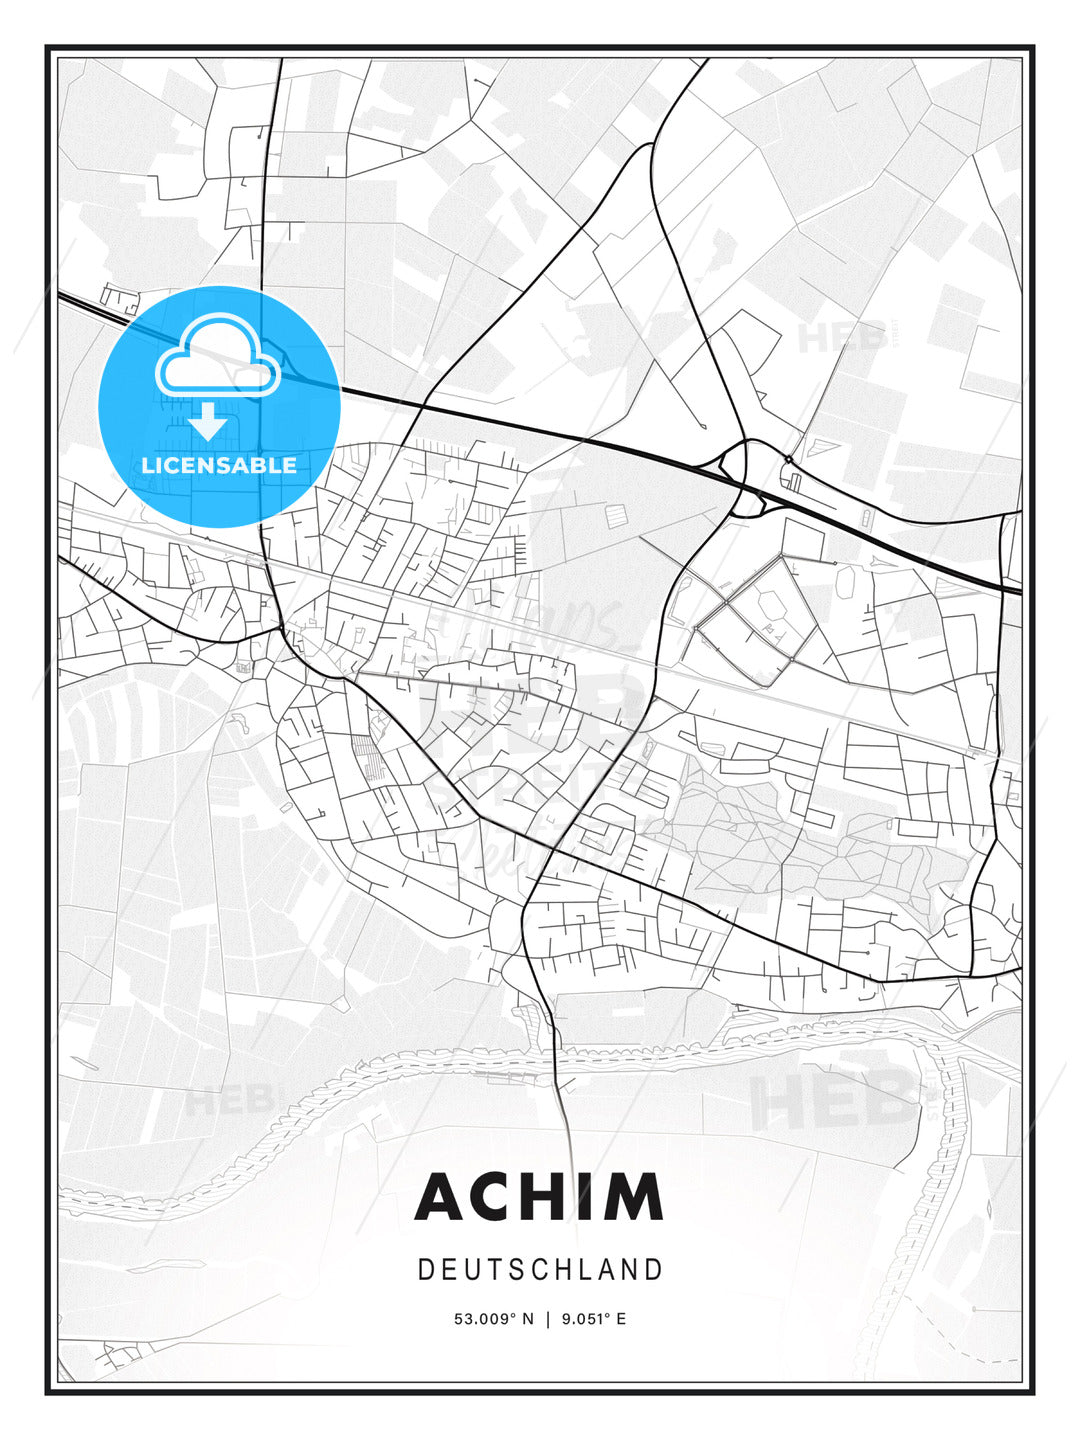 Achim, Germany, Modern Print Template in Various Formats - HEBSTREITS Sketches